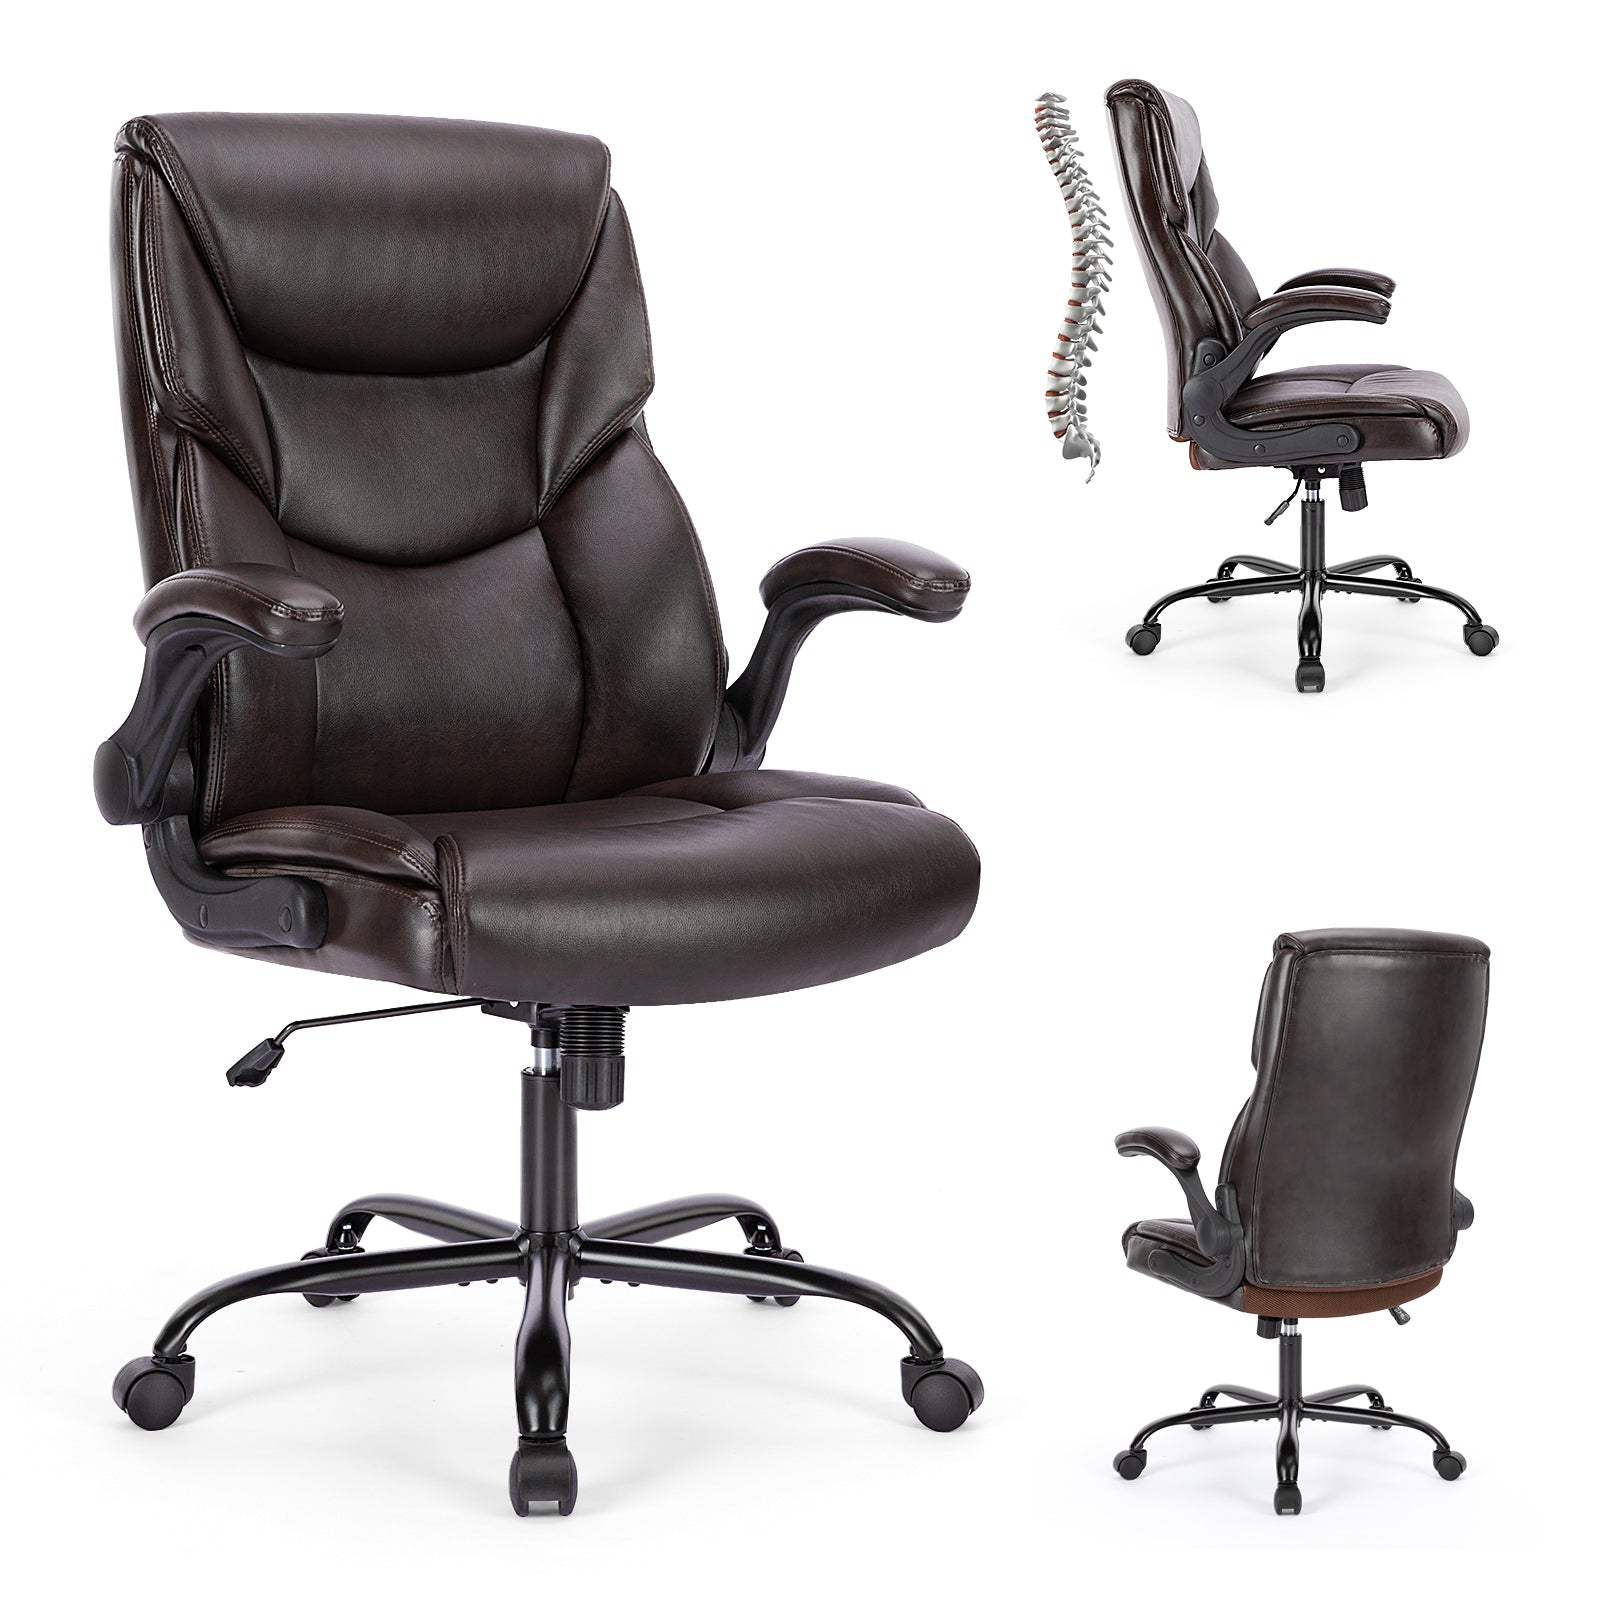 Sweetcrispy Executive Office PU Leather Desk Chair brown-pu leather